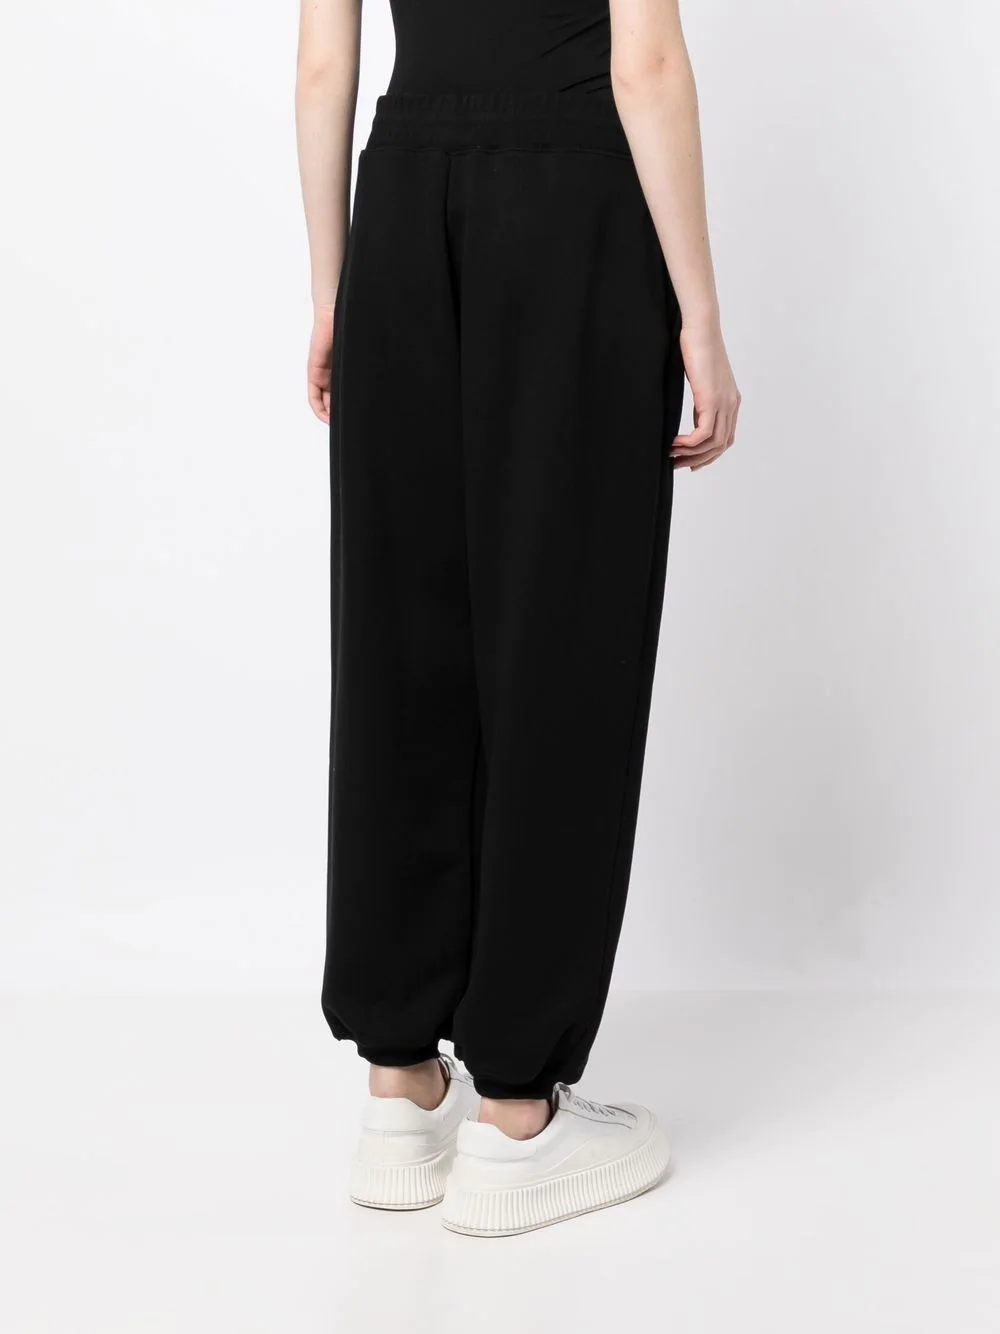 3.1-PhillipLim-Compact-French-Terry-Sweatpants-Black-4